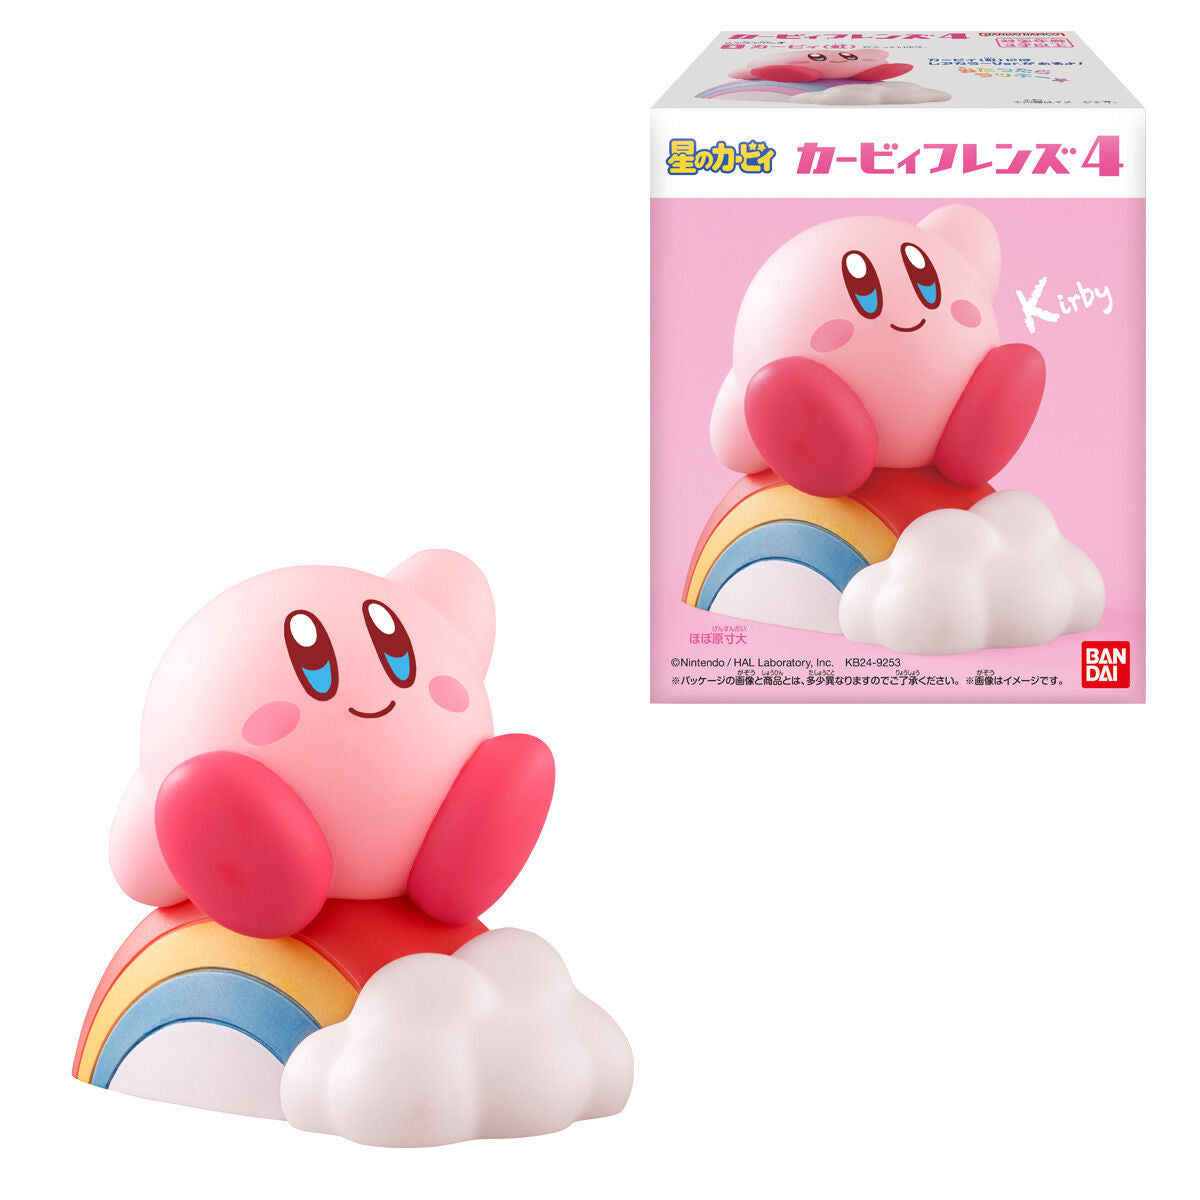 Kirby - Kirby Friends Vol. 4 - Blind Box (Bandai), featuring 9 different pre-painted soft vinyl figures including a rare color version of "Kirby (Rainbow)", each box contains one figure and a piece of soda-flavored gum, dimensions approx. height 6.5 cm, release date 10th June 2024, Nippon Figures